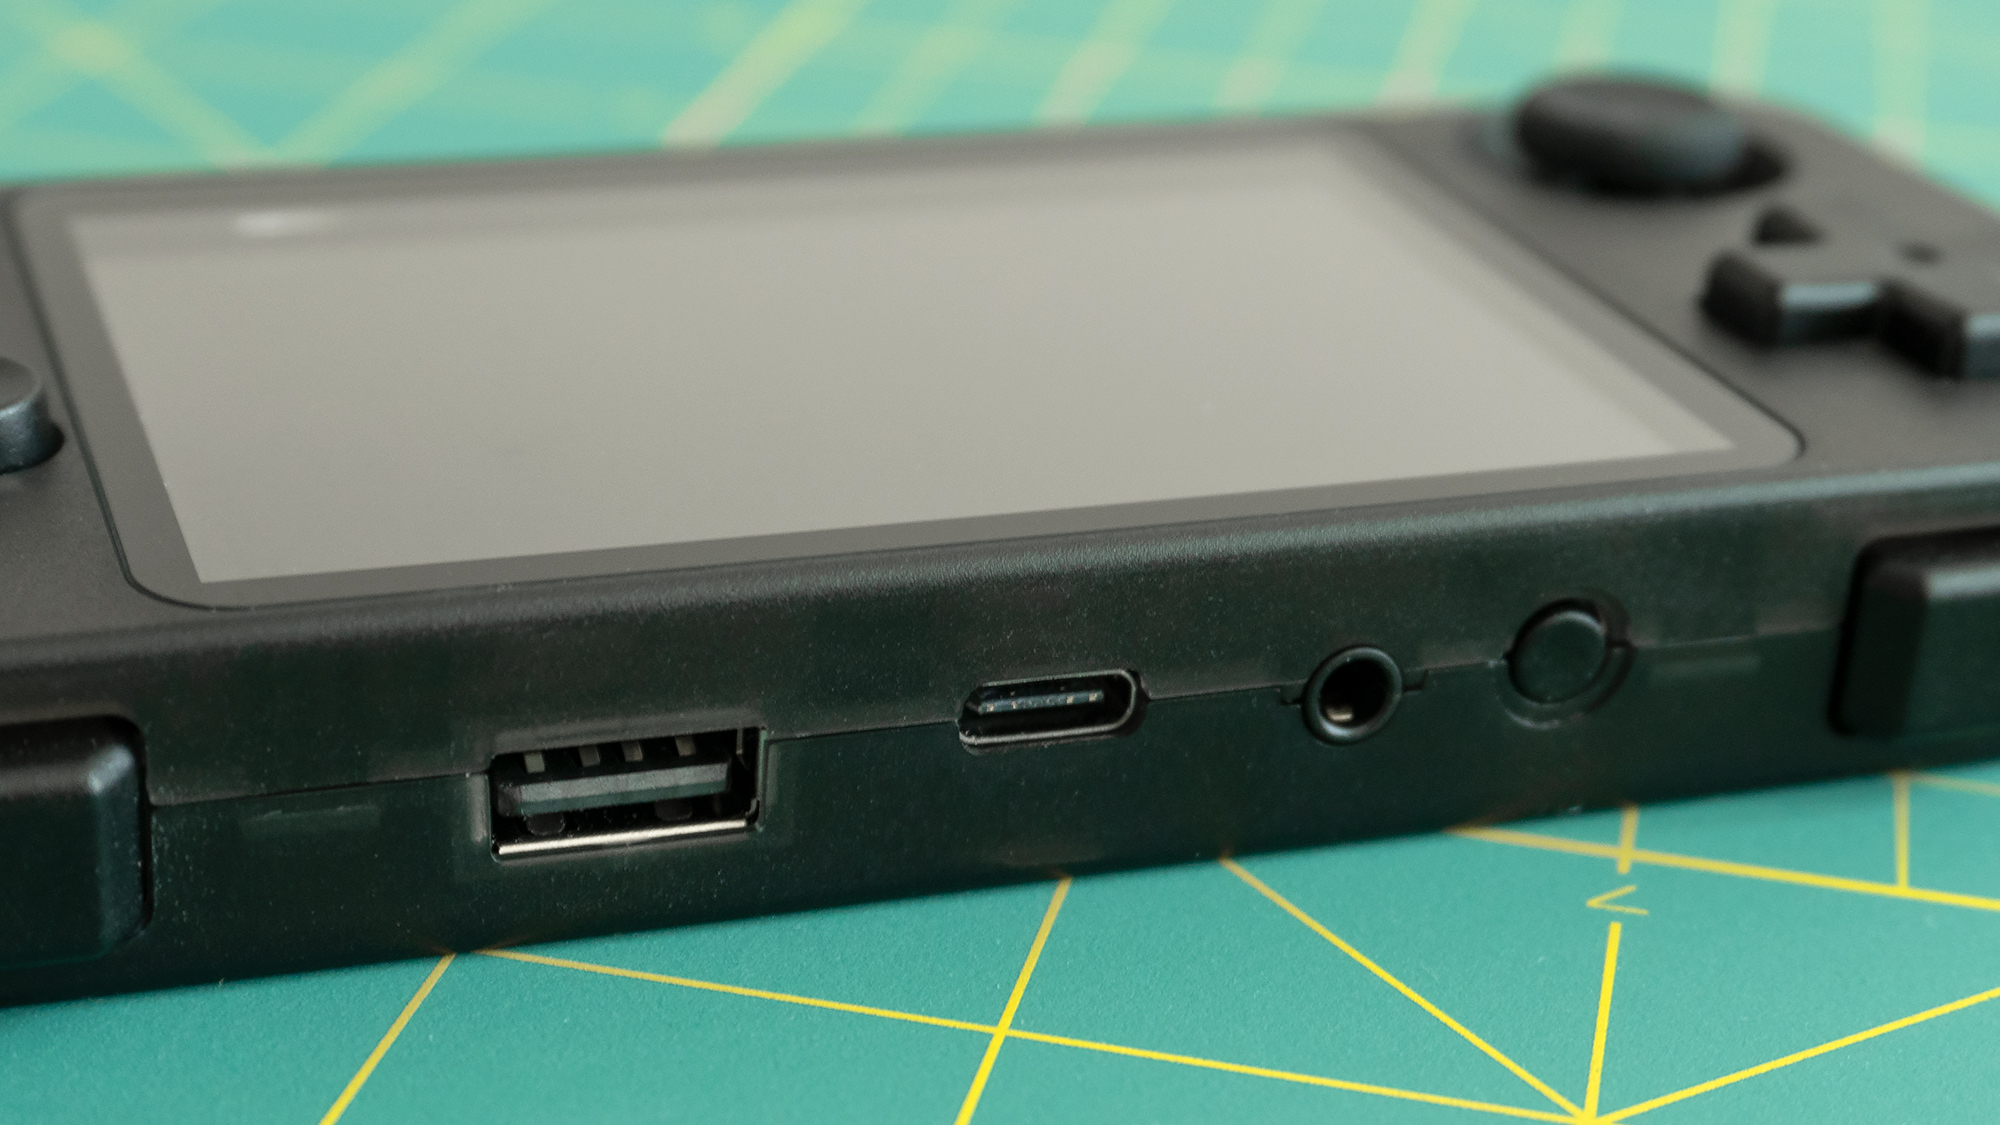 On the top of the RK2020 you'll find a USB-A jack for connecting peripherals, a USB-C jack for charging, and an incorrectly placed headphone jack. (They should always be located on the bottom of devices with a screen.) (Photo: Andrew Liszewski - Gizmodo)